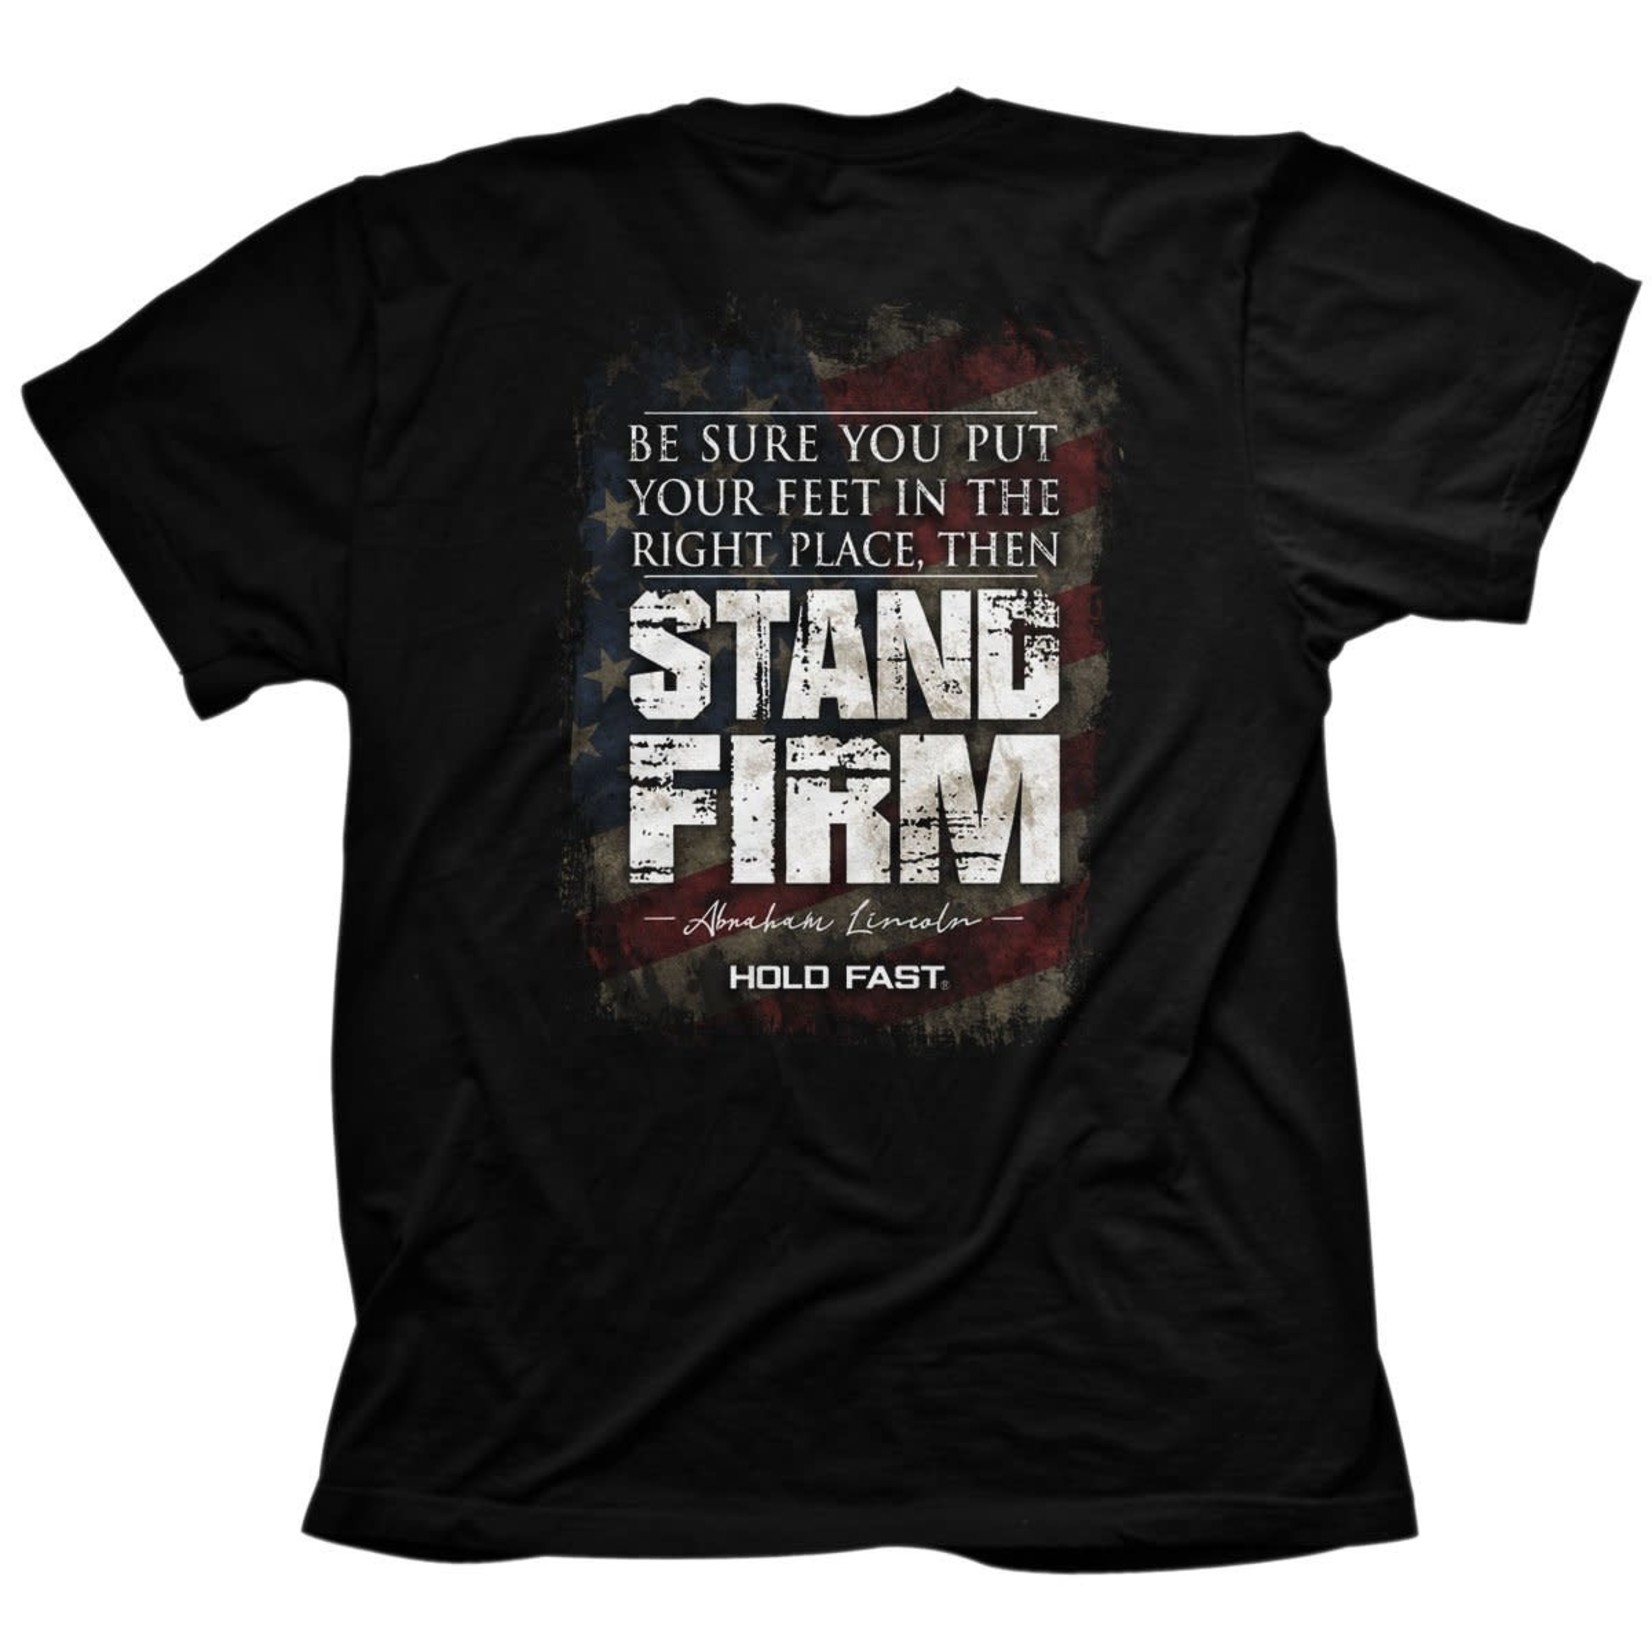 HOLD FAST LINCOLN FLAG TEE